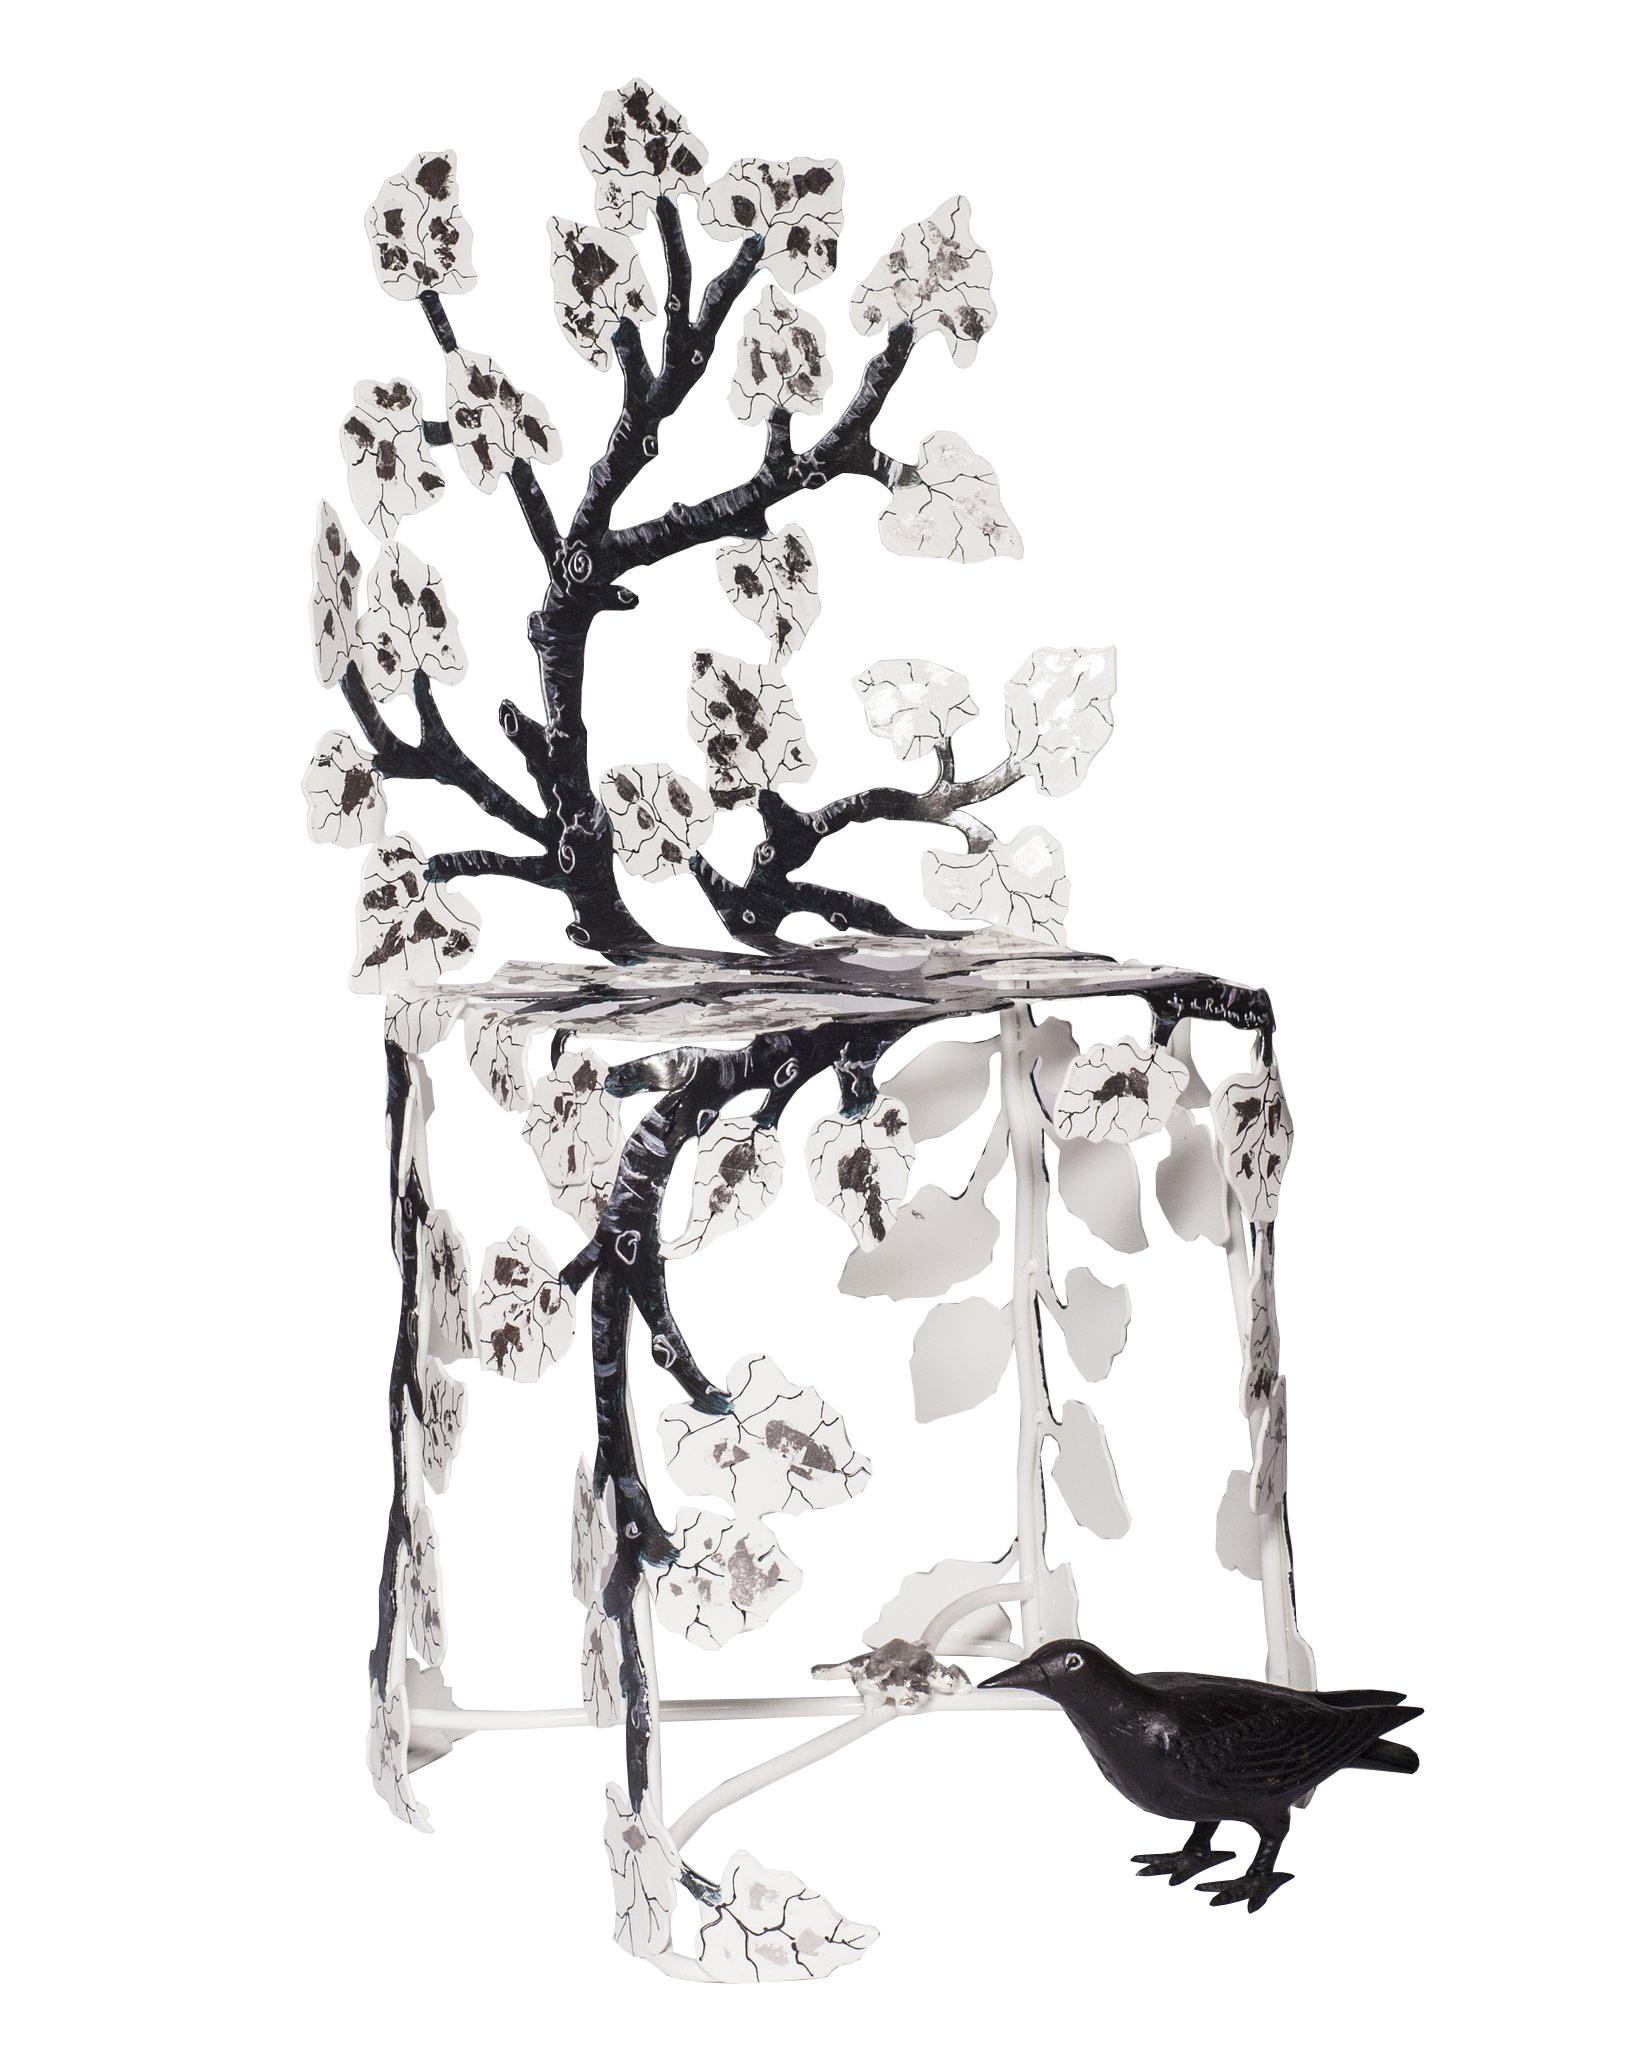 A handmade pair of sculptural chairs by renowned French Artist Joy de Rohan Chabot. The winter chair is a beautiful example how a cold bare tree can be the perfect canvas for fresh fallen snow. Hand forged and painted by the artist, each chair is